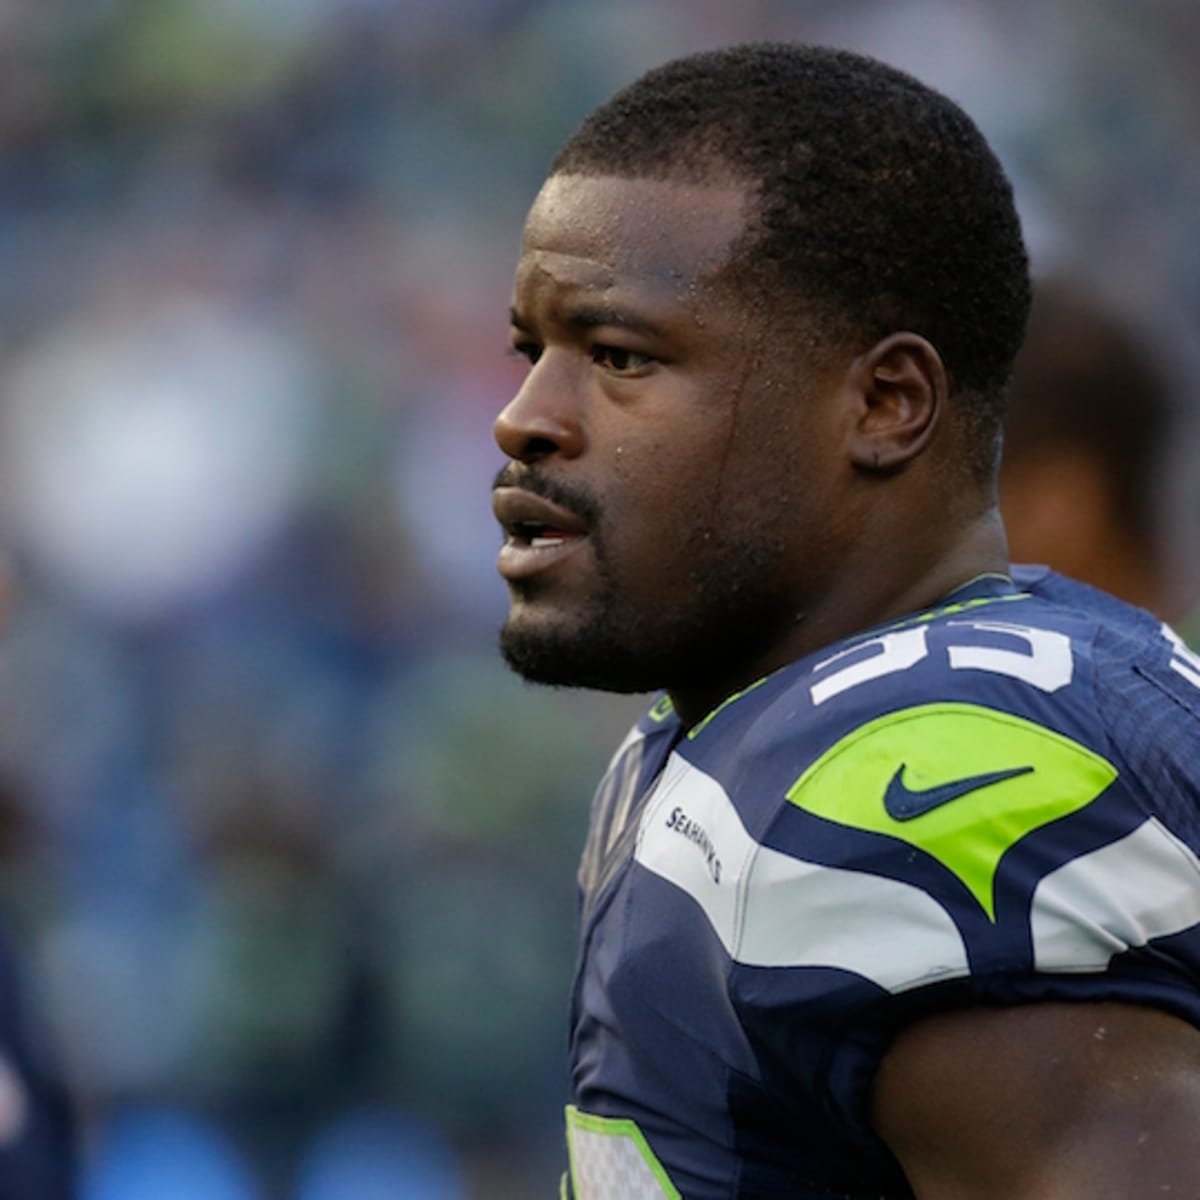 Former Seahawks running back Christine Michael's XFL debut was a